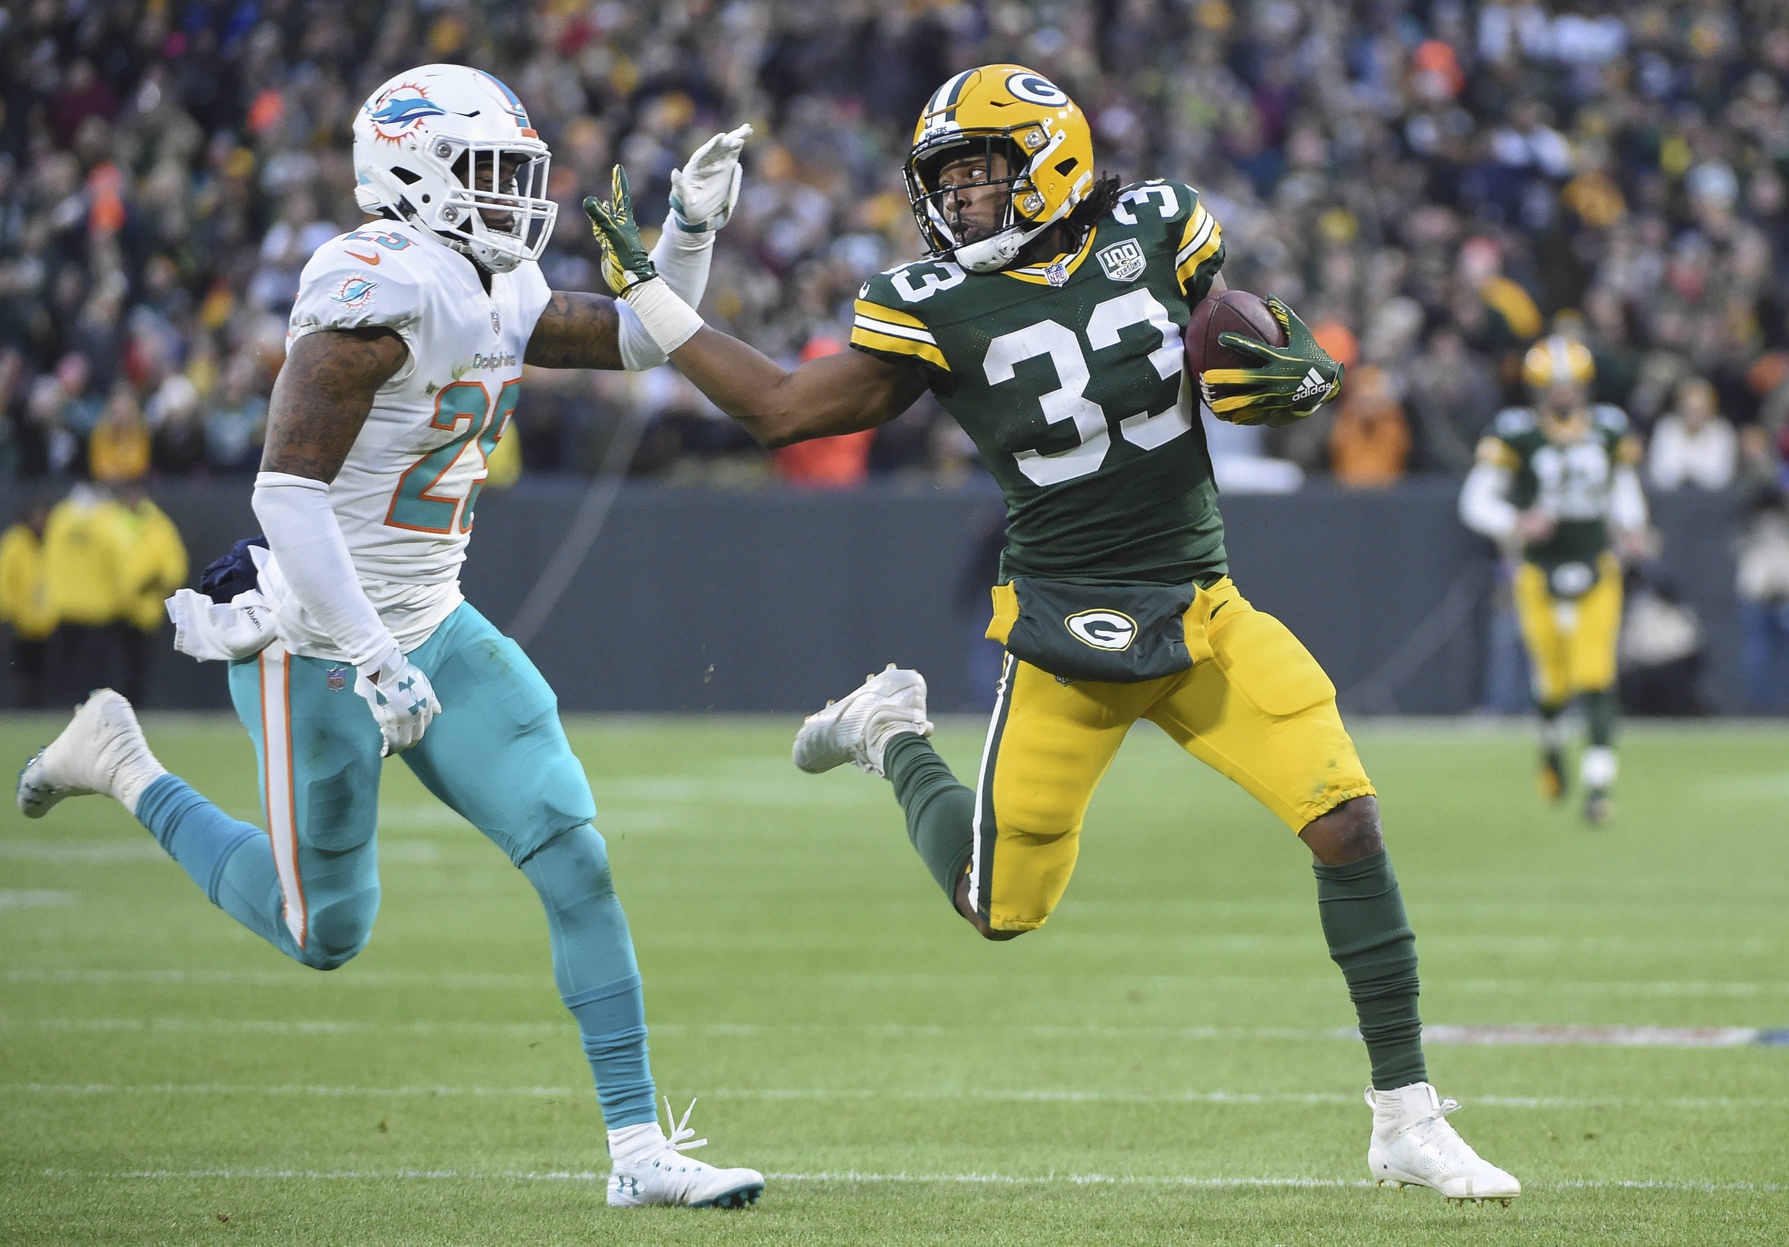 Grading the Pack Week 10 Dolphins vs. Packers